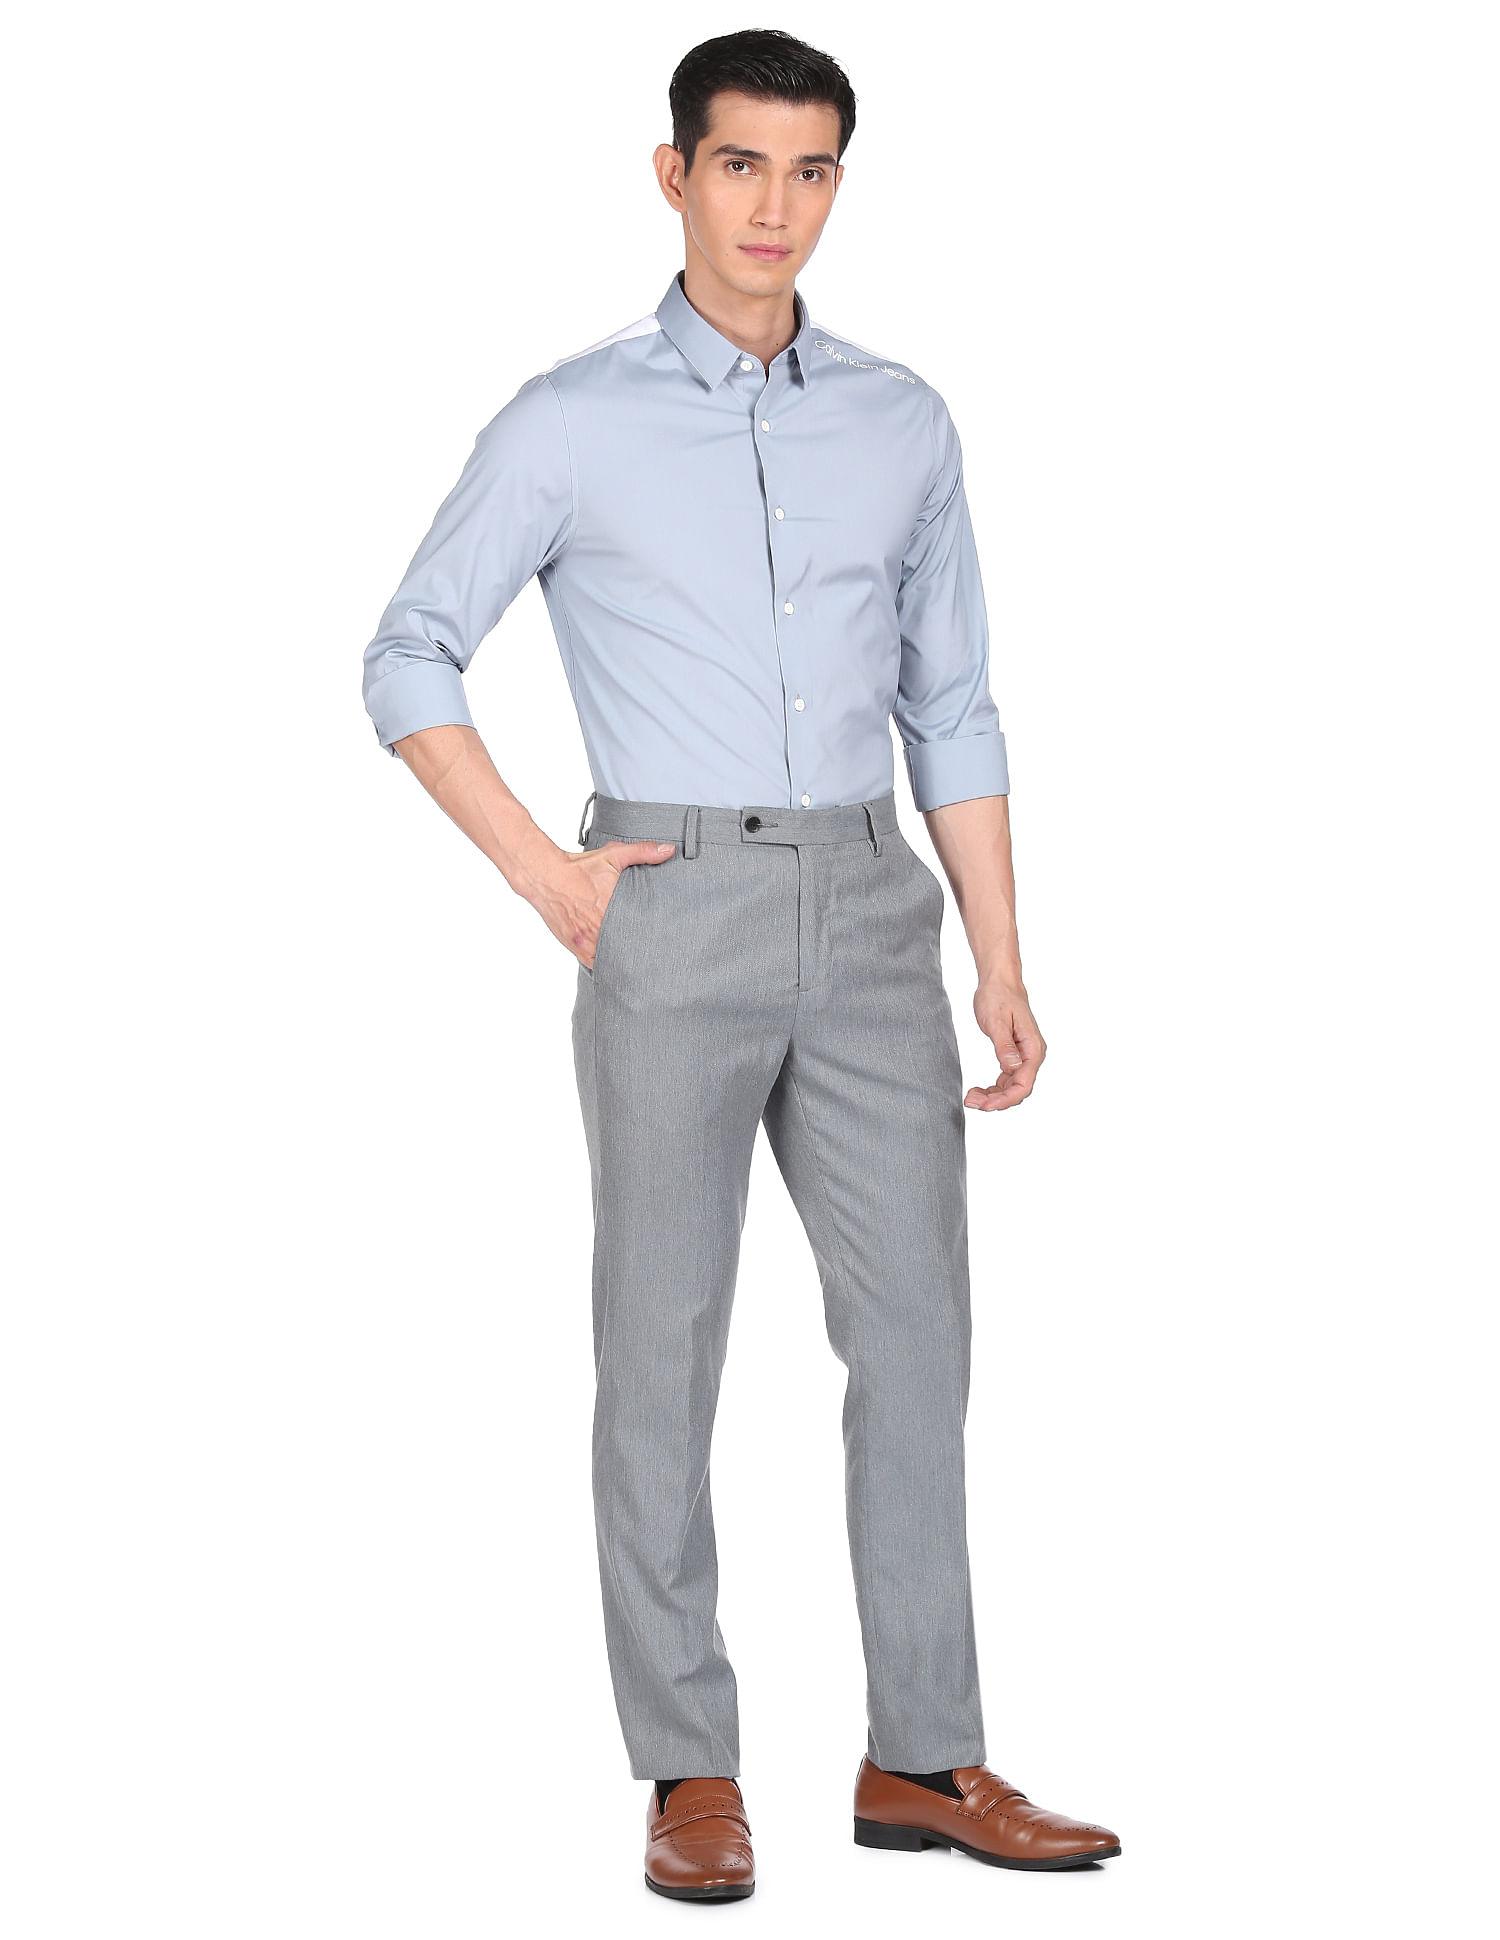 Grey Pants with Blue Shirt Outfits For Men 563 ideas  outfits   Lookastic